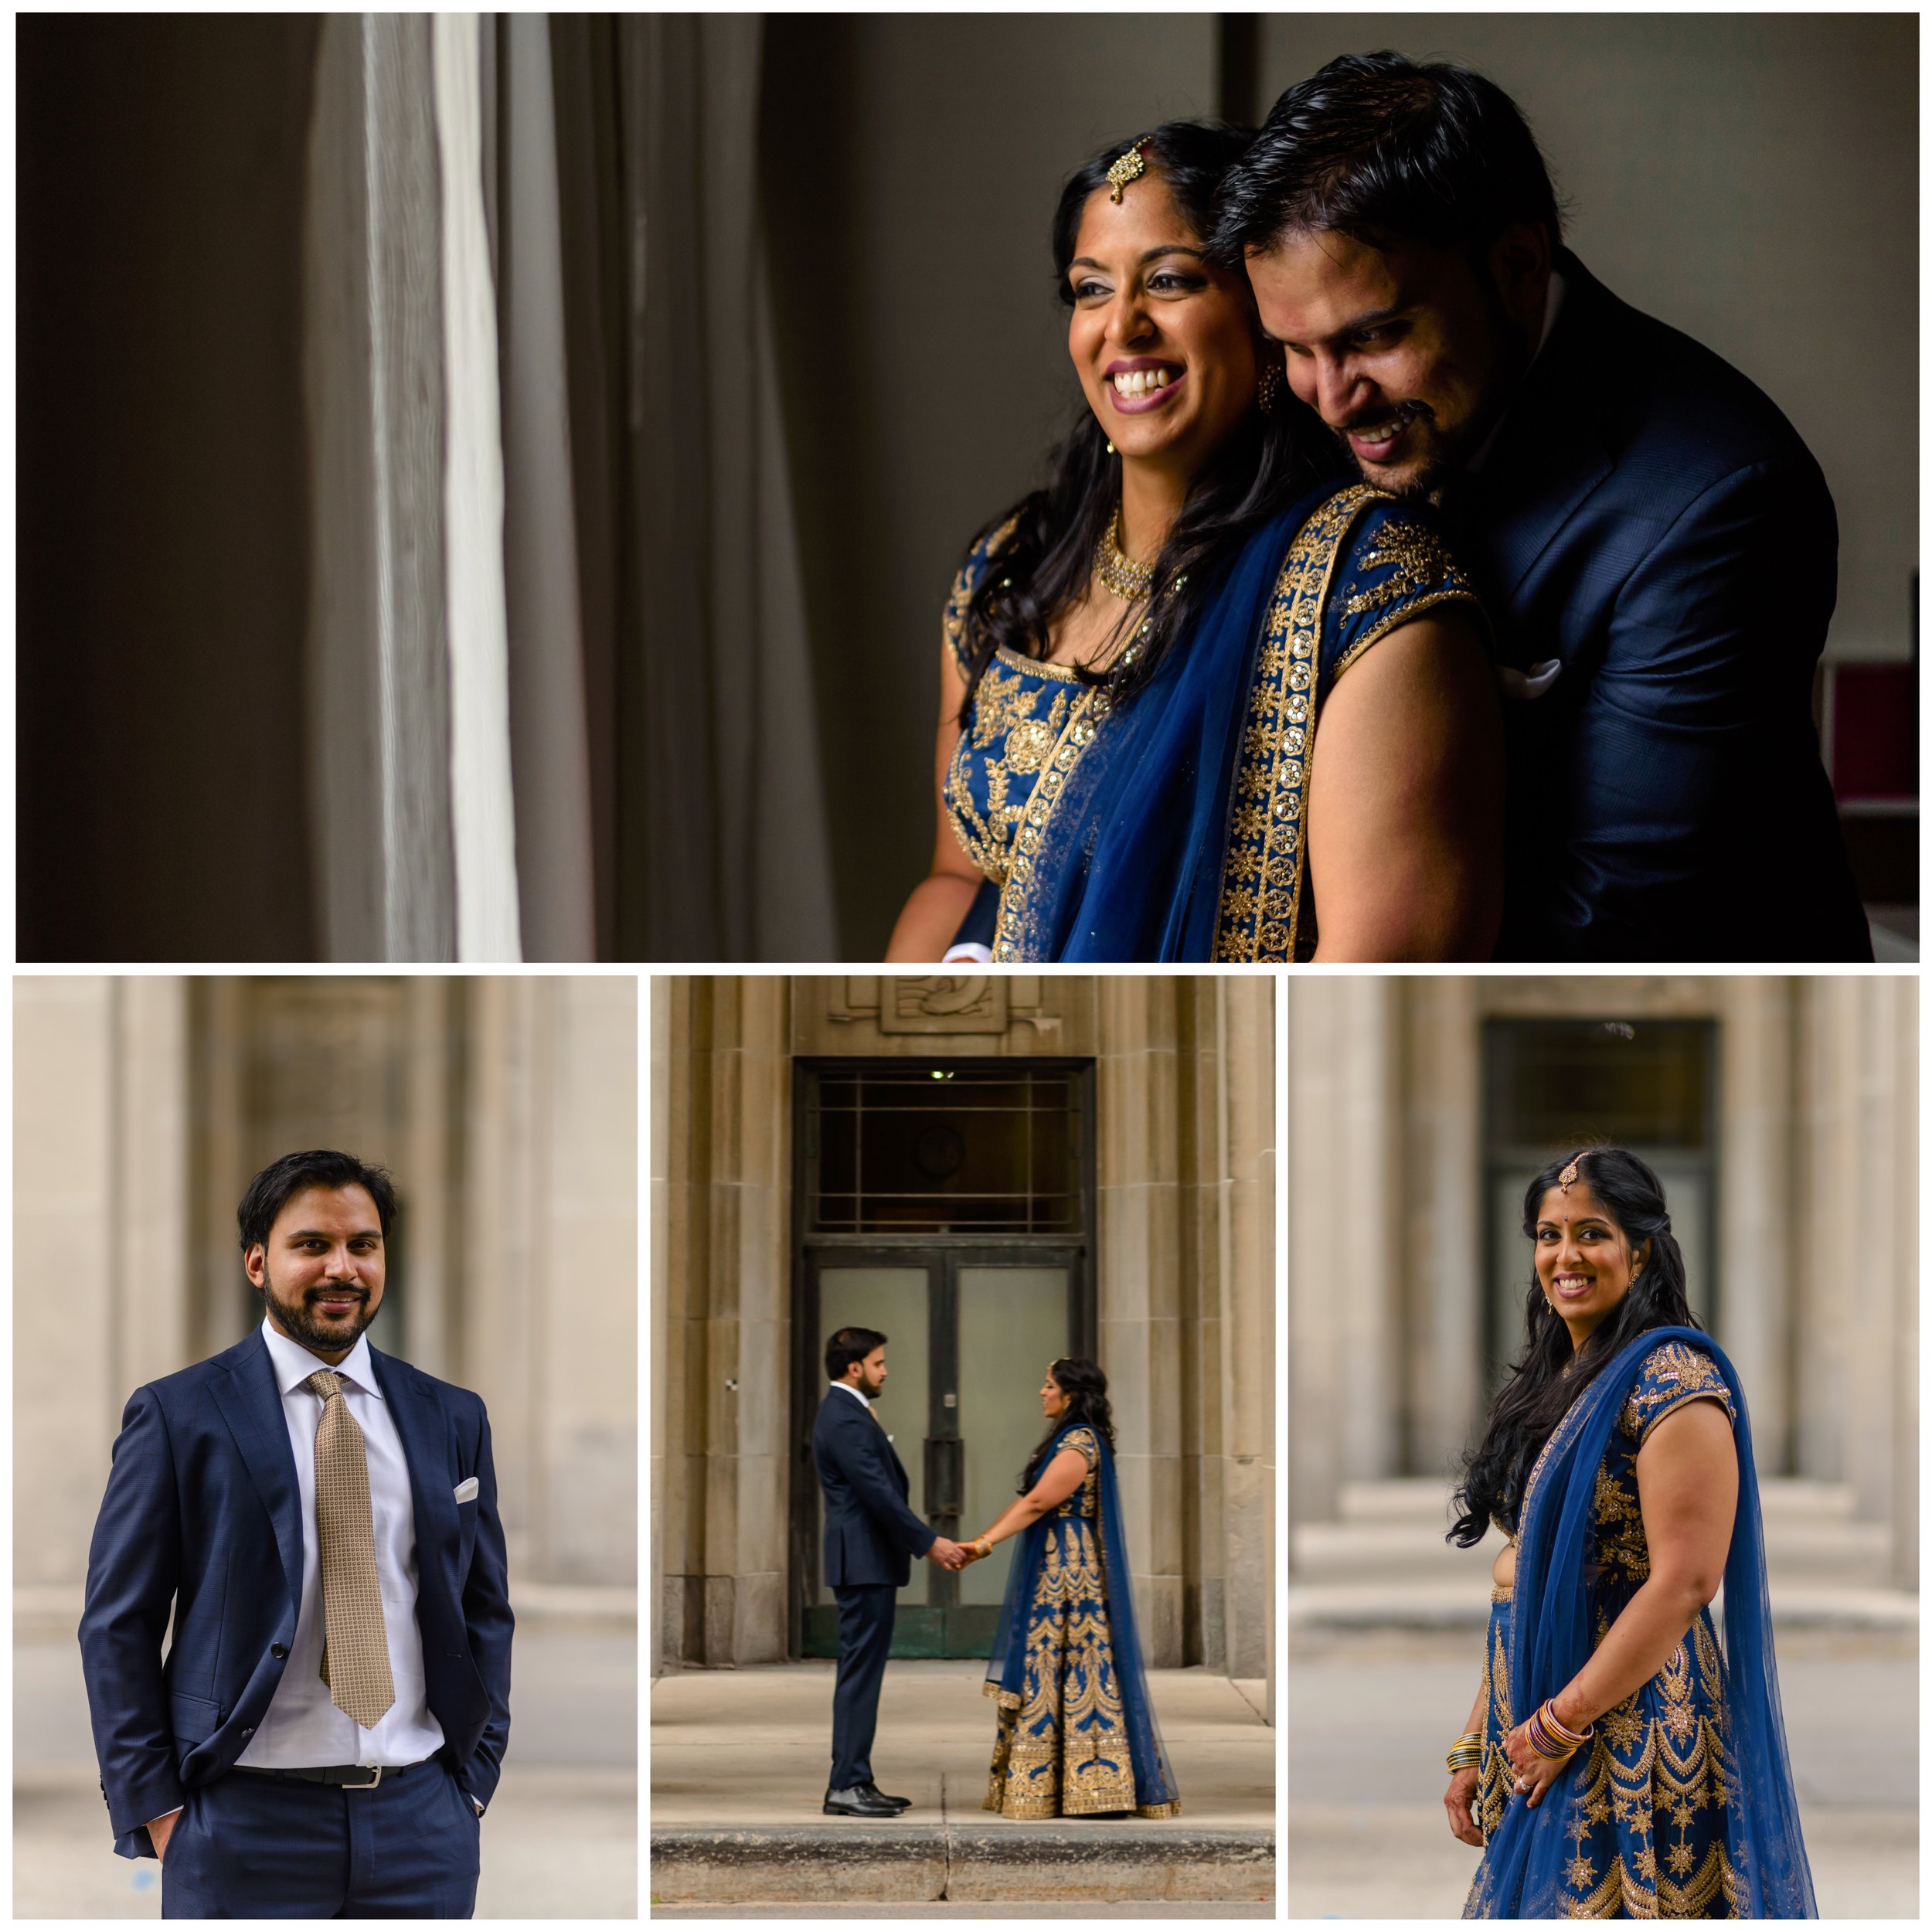 Portraits of an Indian couple getting married in Ottawa